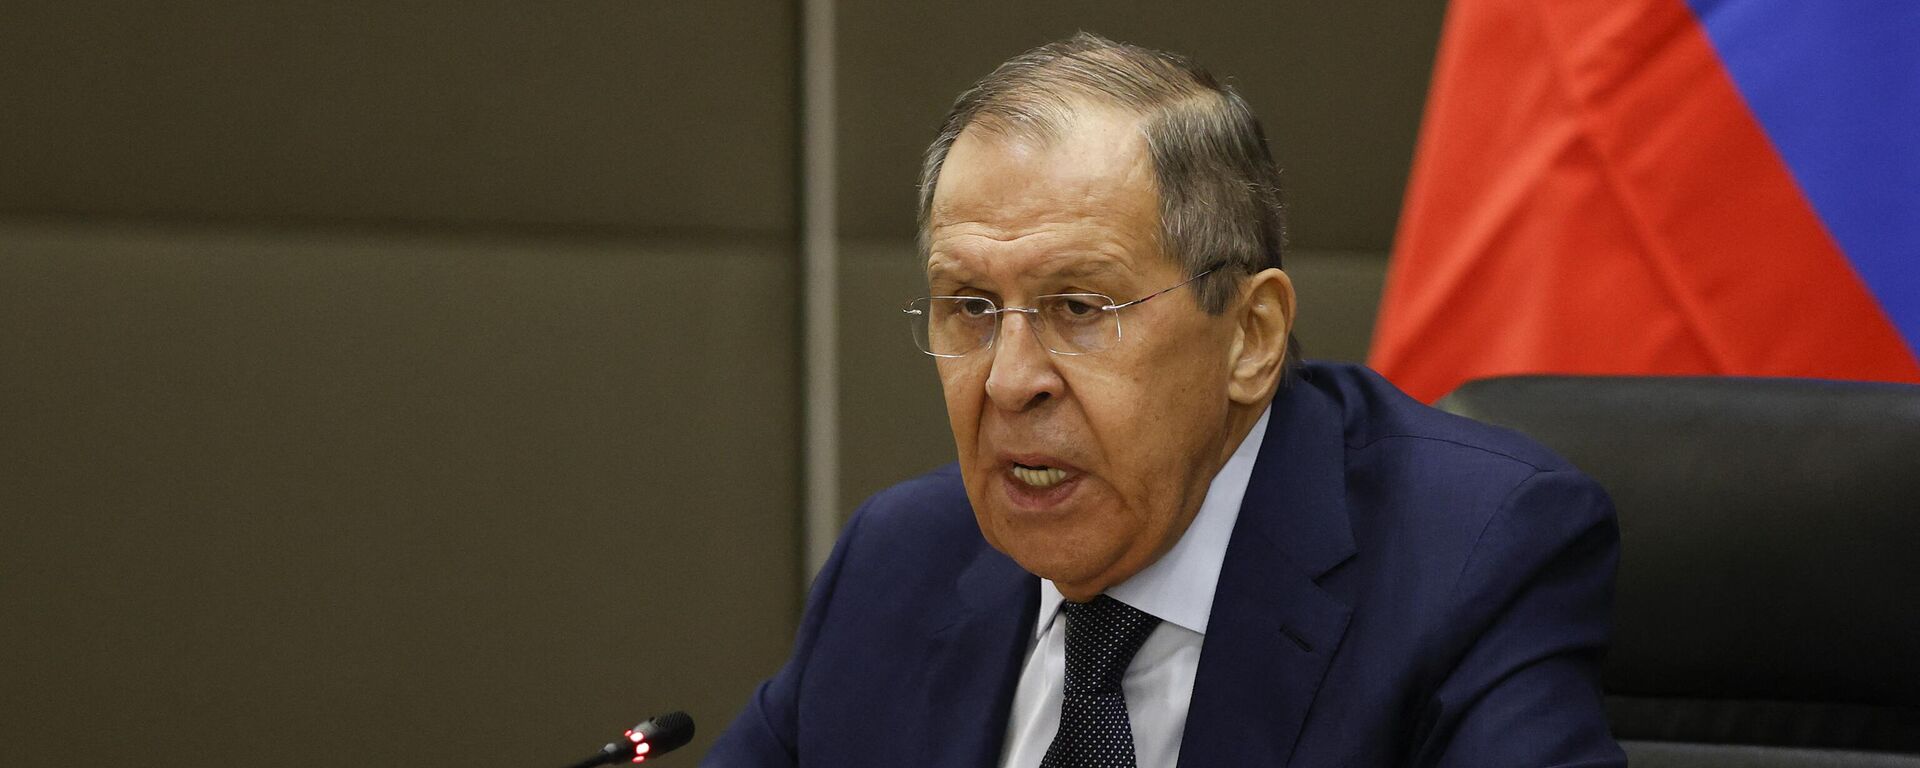 Russian Minister of Foreign Affairs Sergey Lavrov speaks during a press conference after his meeting with South African Minister of International Relations and Cooperation Naledi Pandor at the OR Tambo Building in Pretoria on January 23, 2023 - Sputnik International, 1920, 24.01.2023